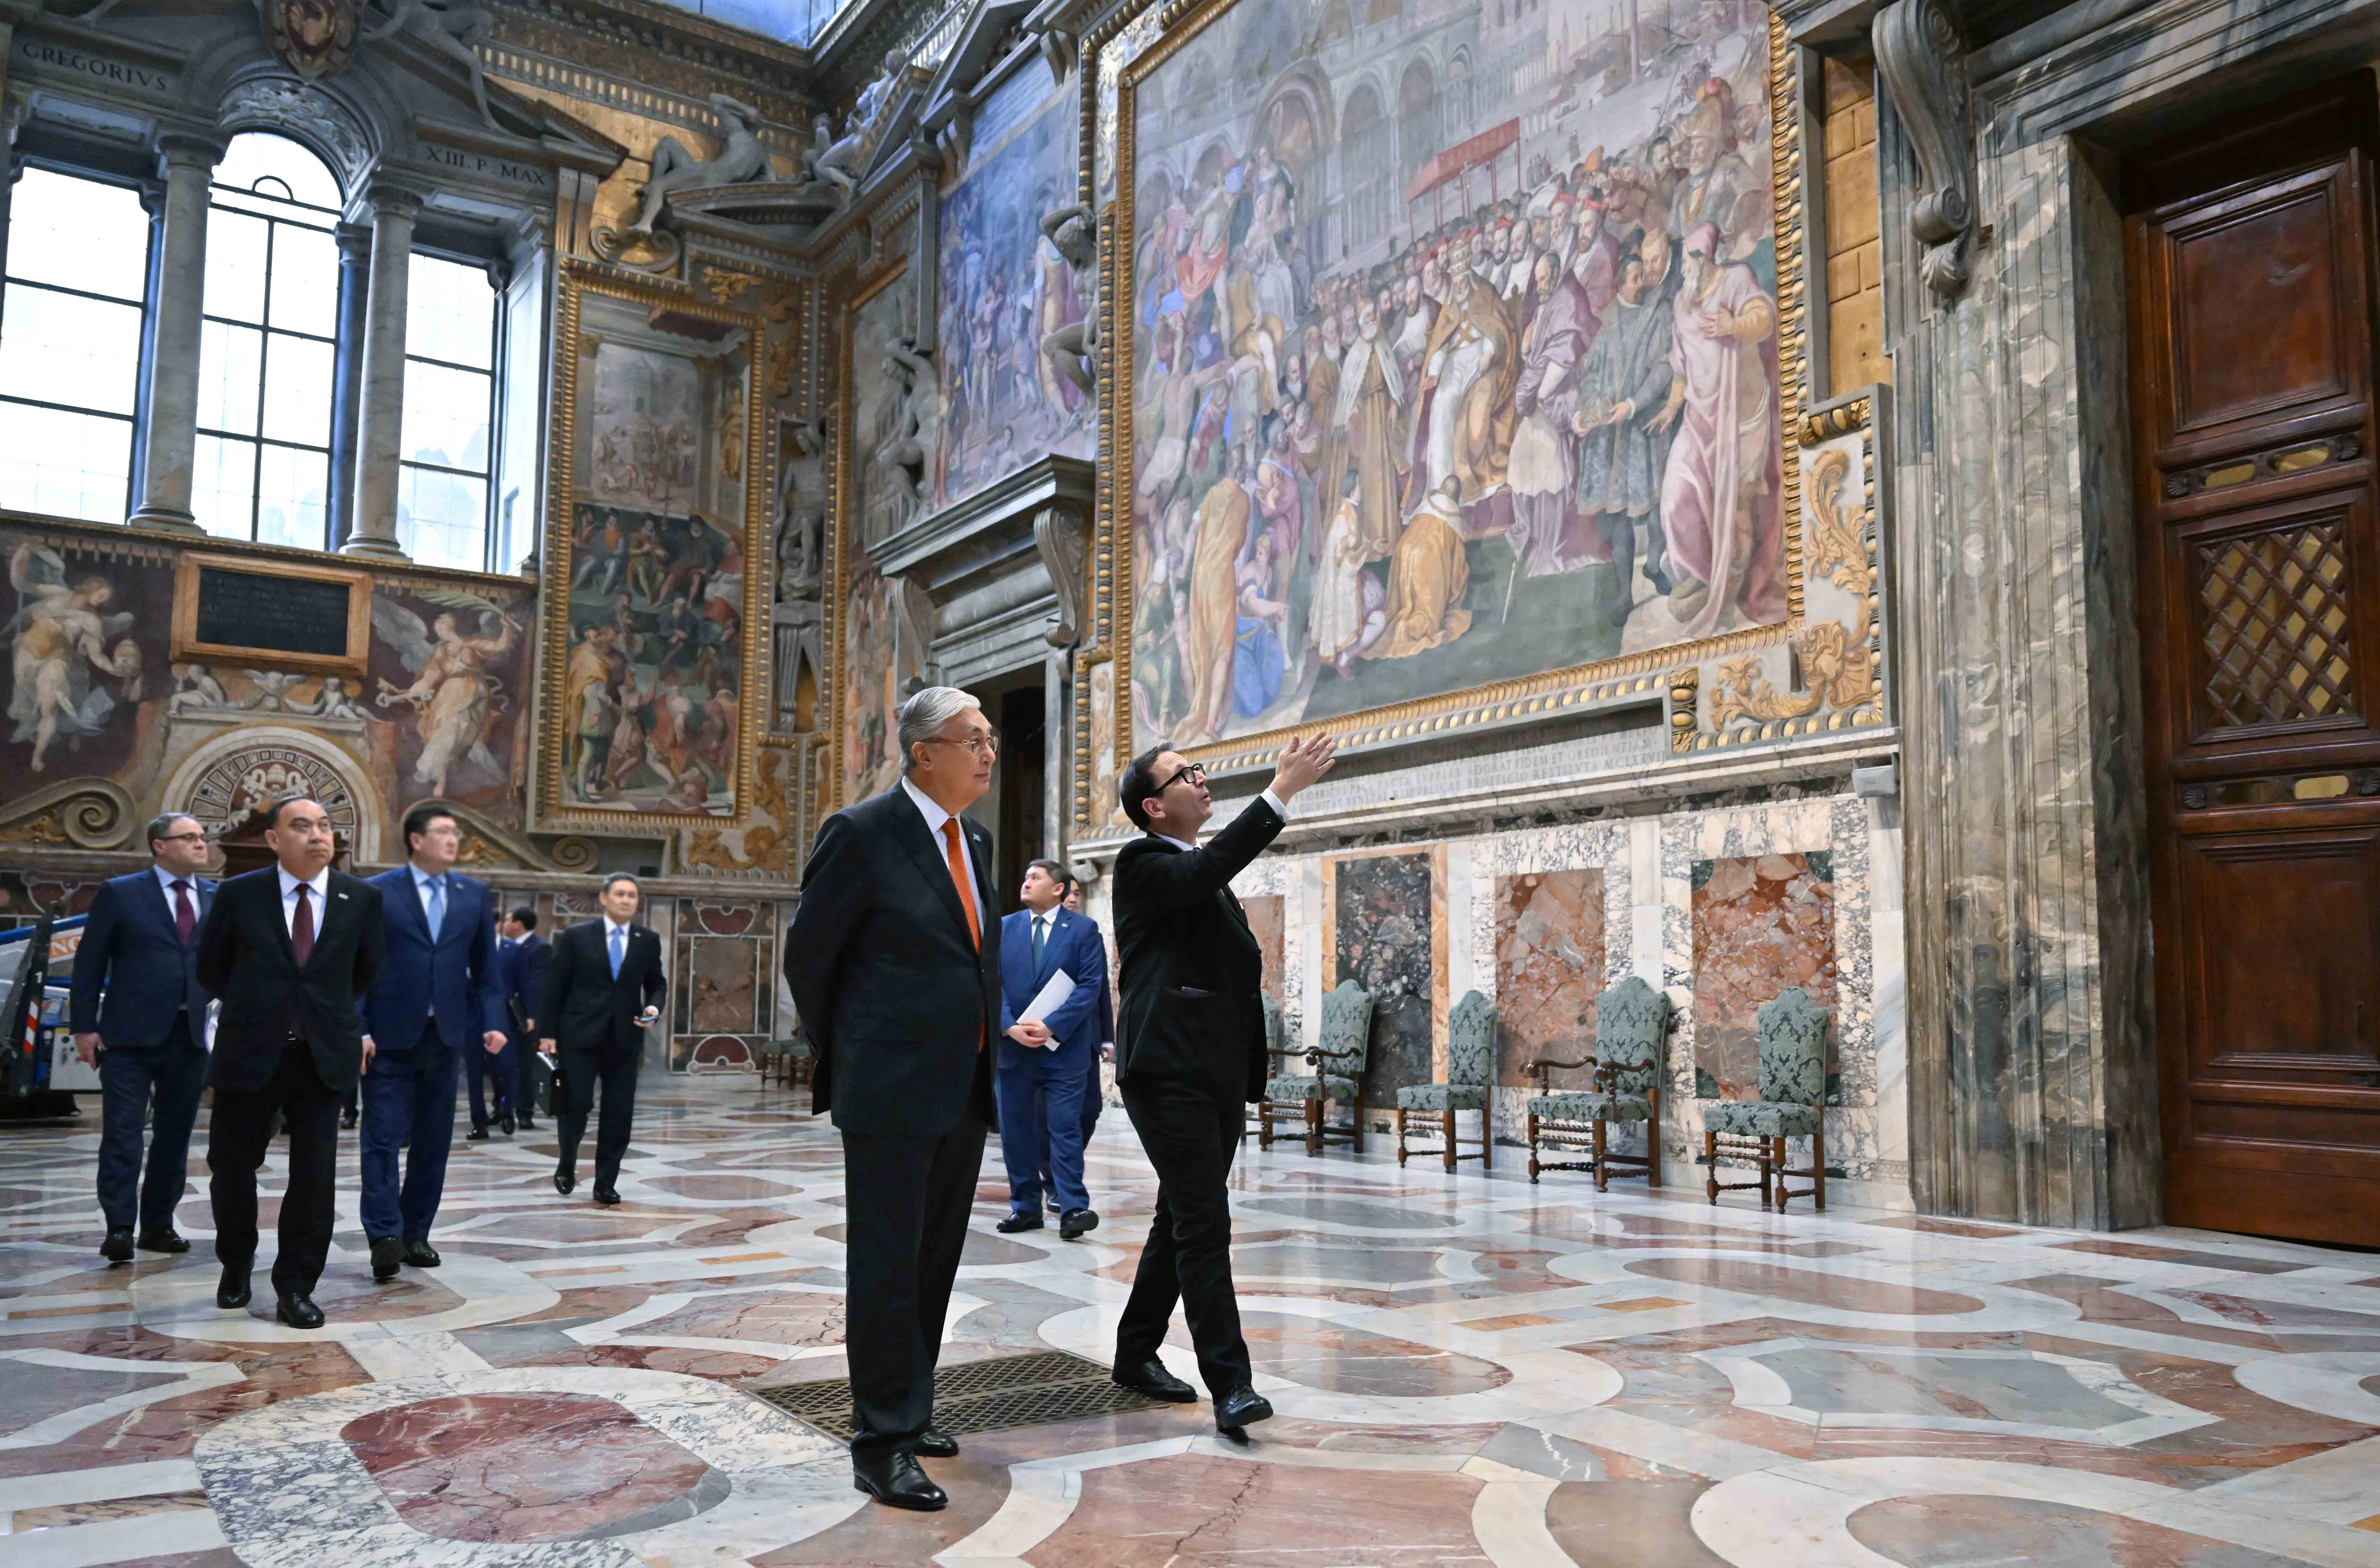 The Head of State visited Vatican museums